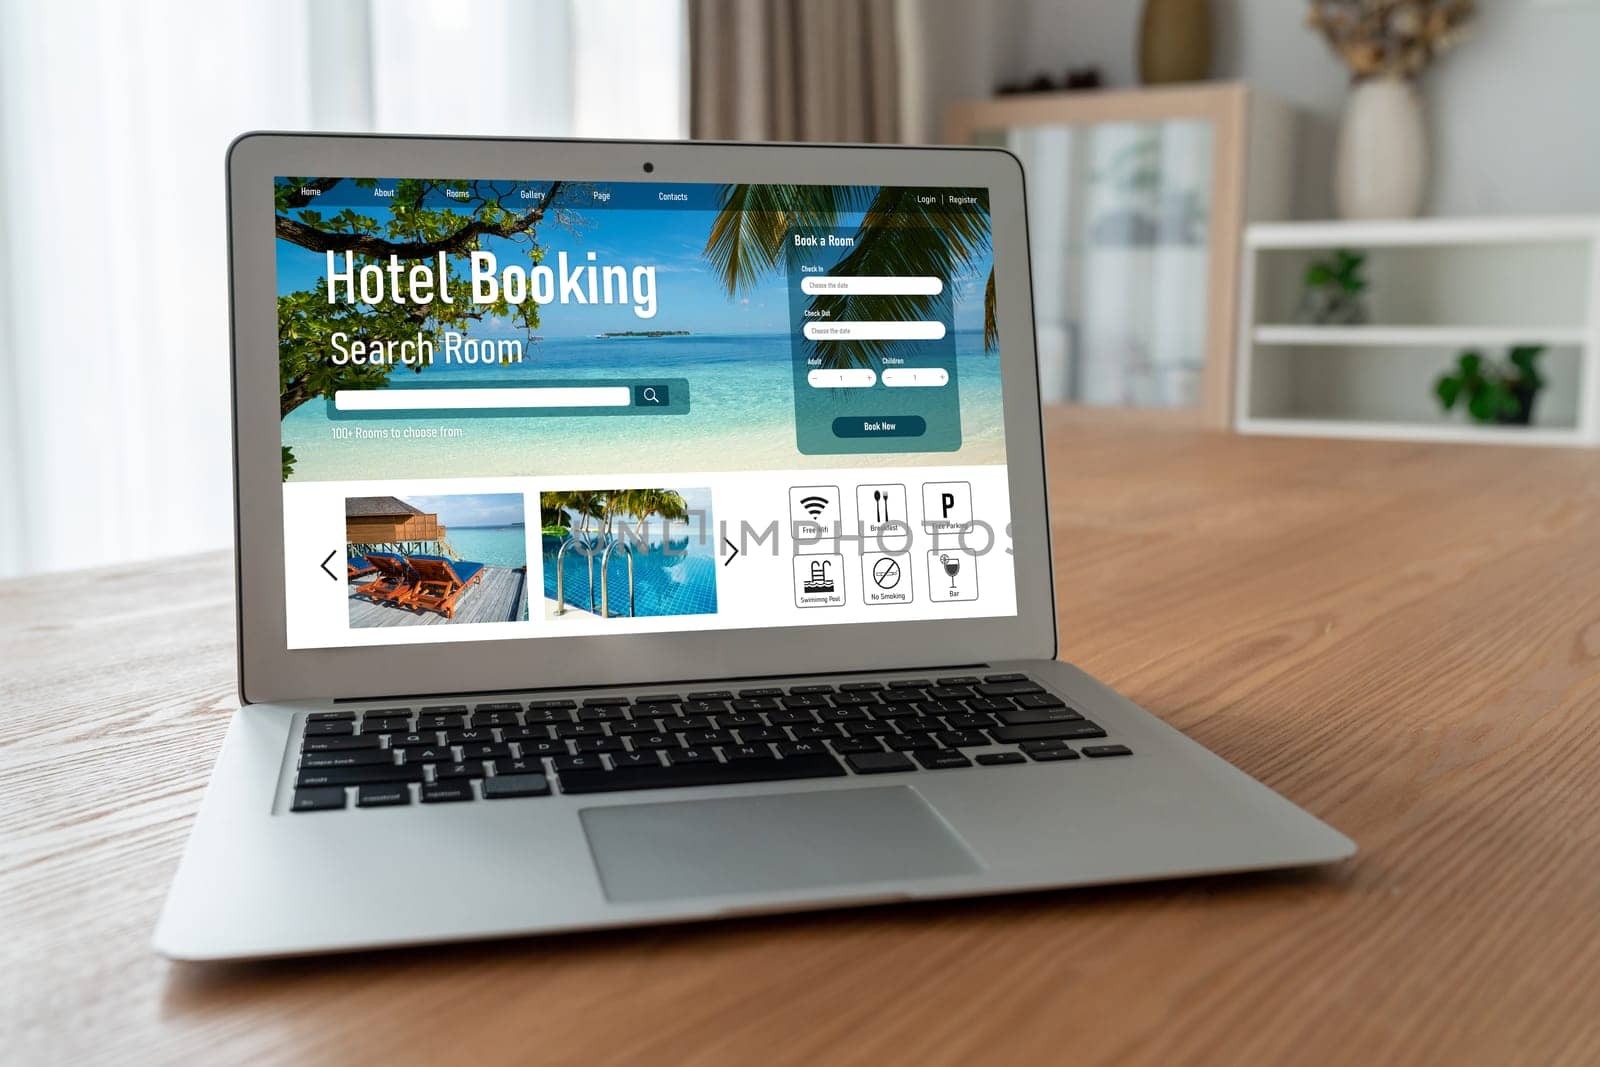 Online hotel accommodation booking website provide modish reservation system . Travel technology concept .